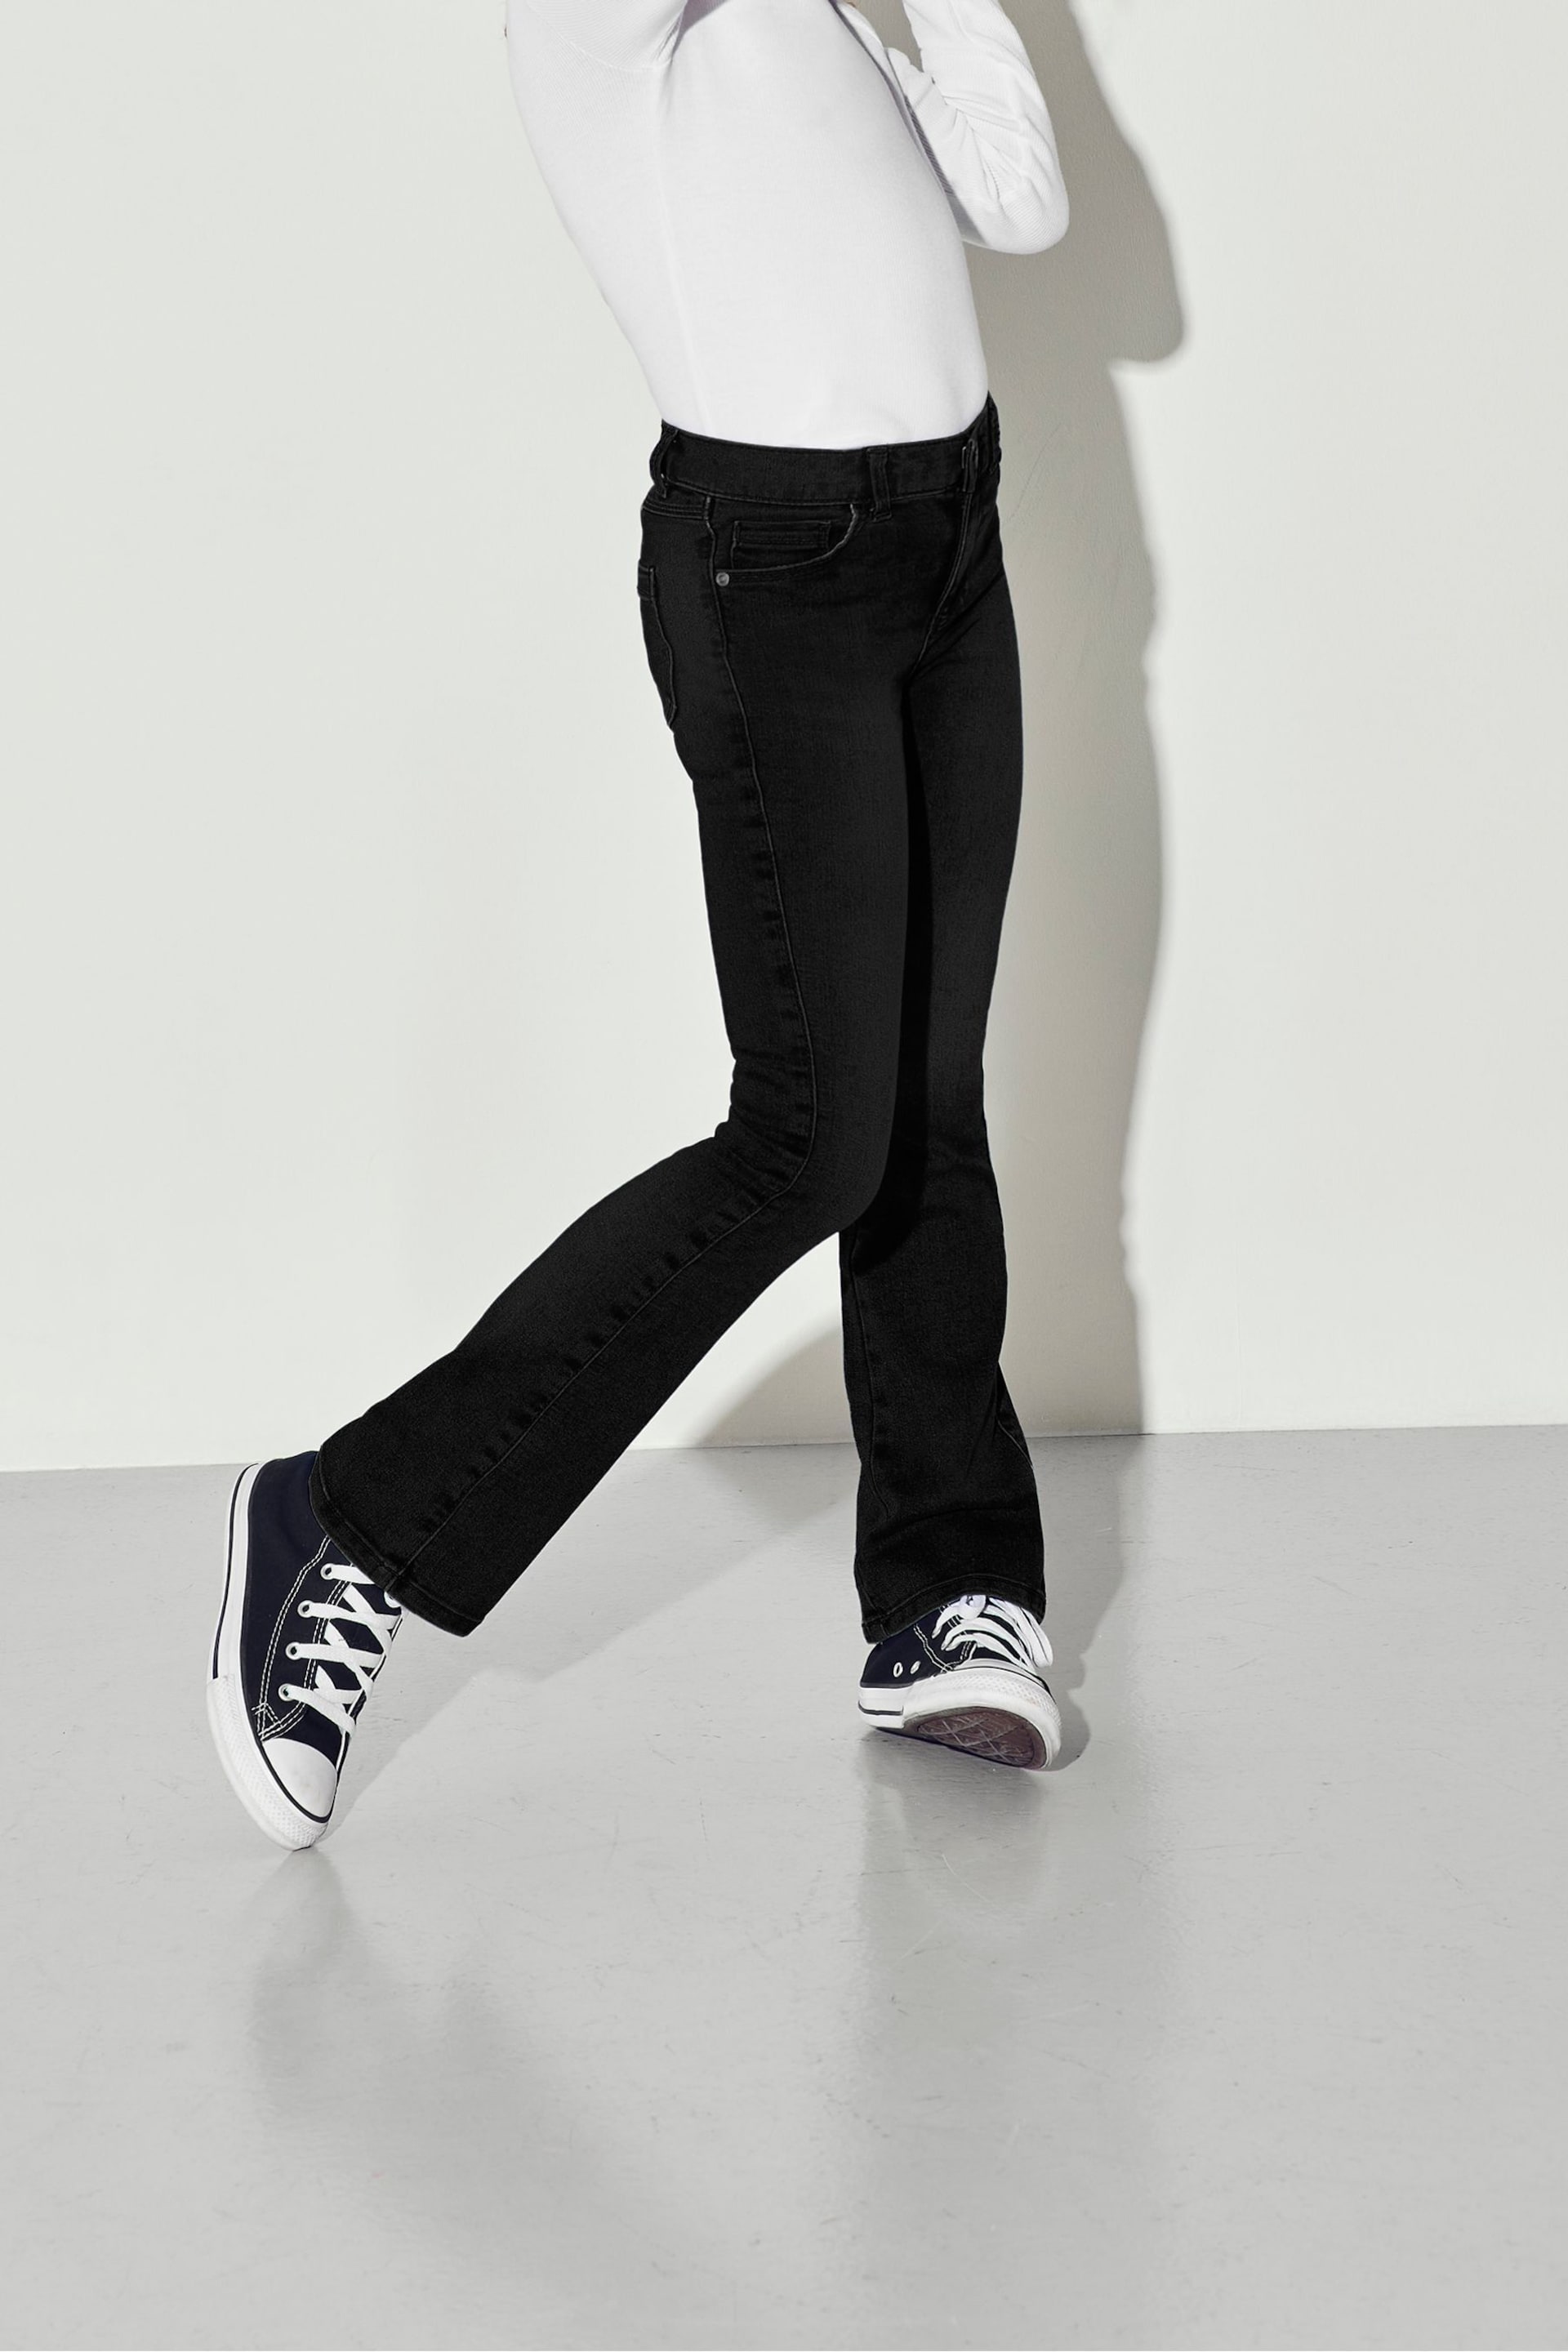 ONLY KIDS Flare Leg Jeans With Adjustable Waist - Image 1 of 4